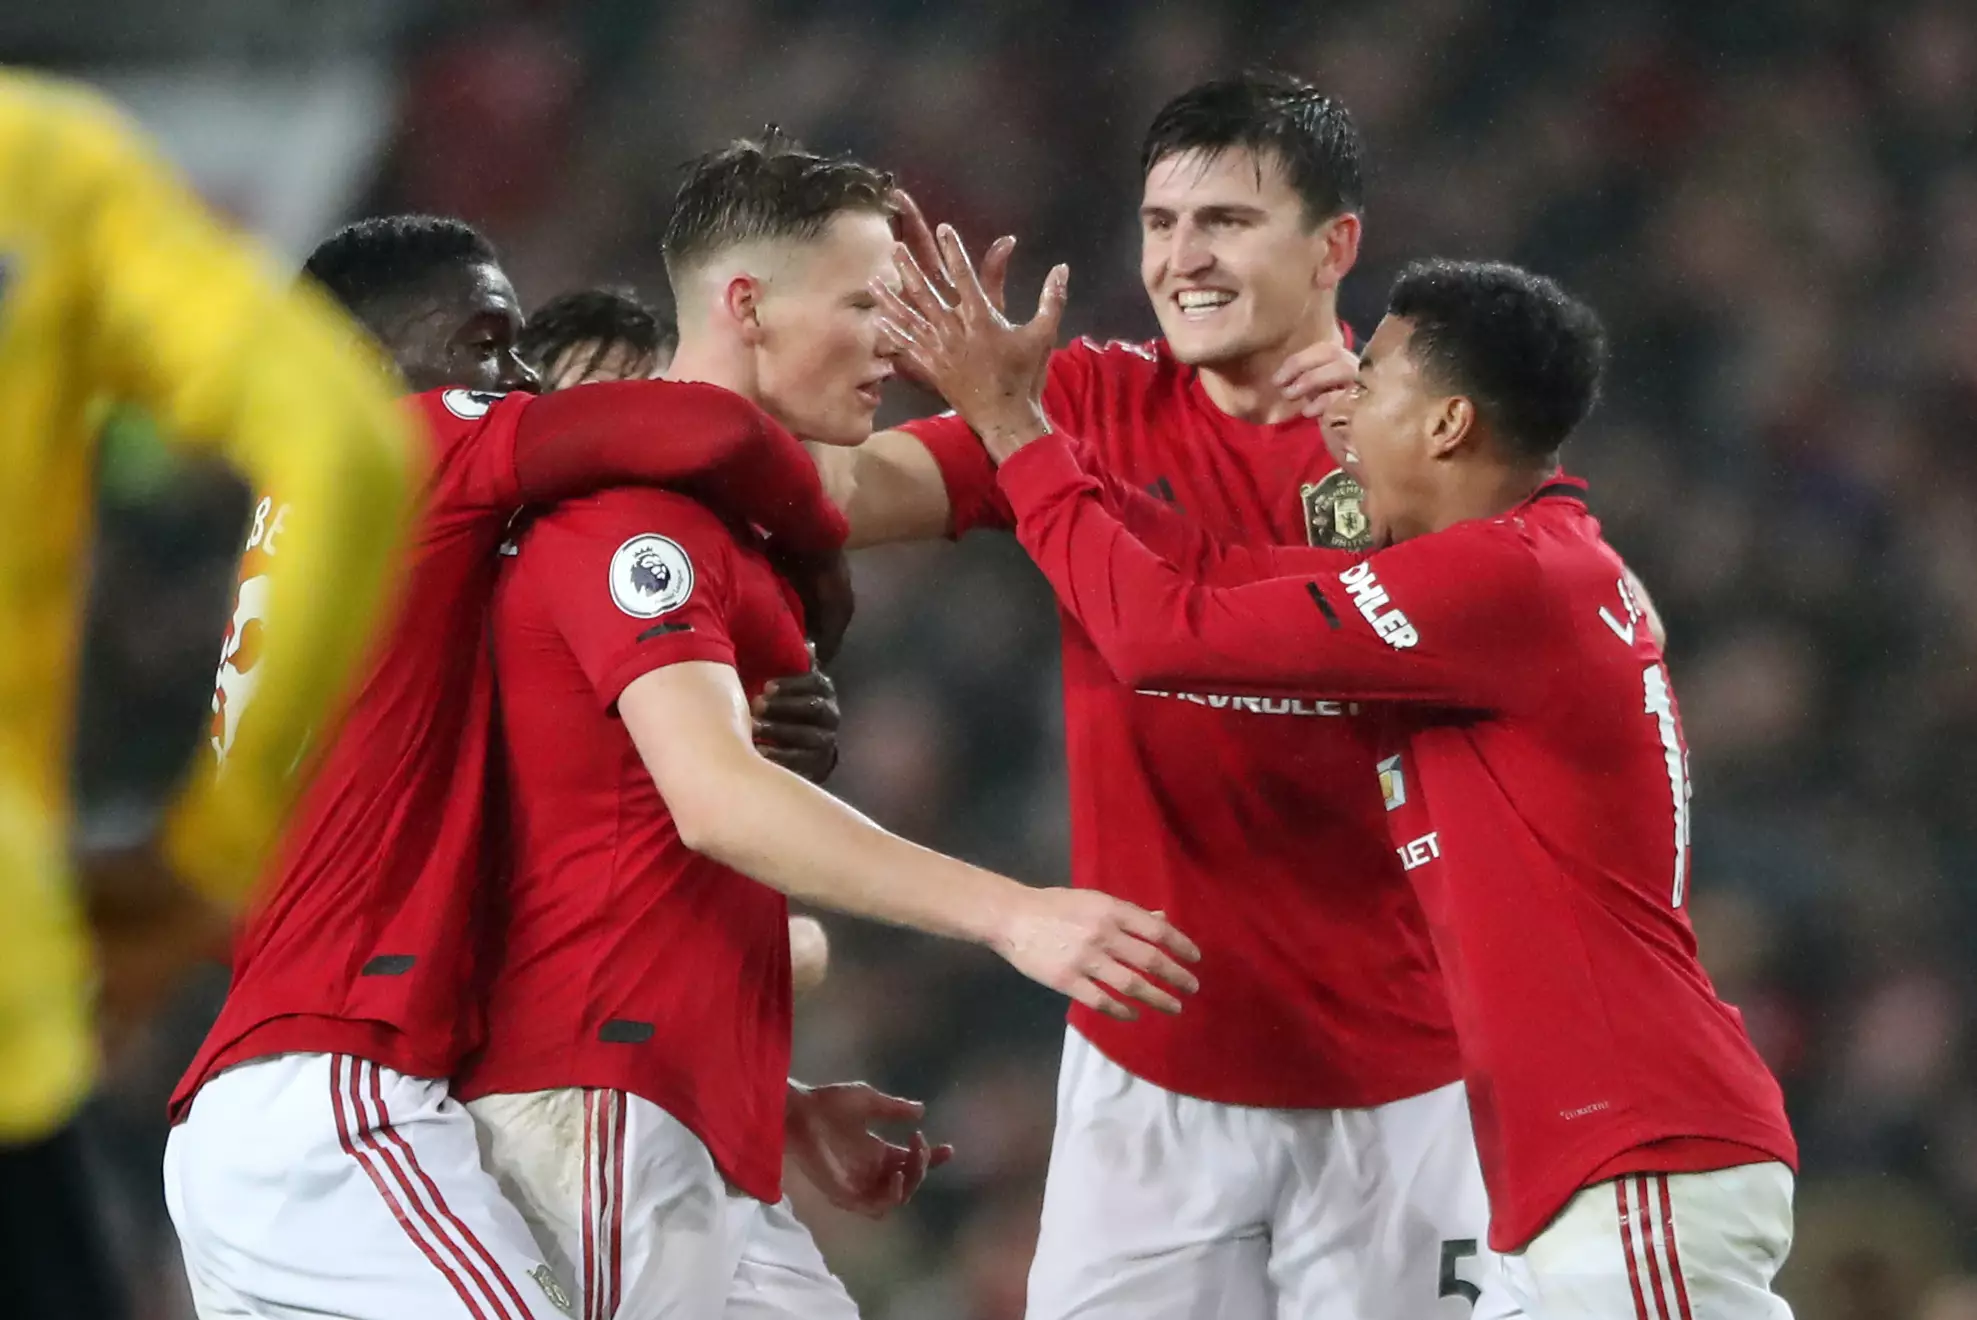 Scott McTominay scored a rocket against Arsenal last month at Old Trafford